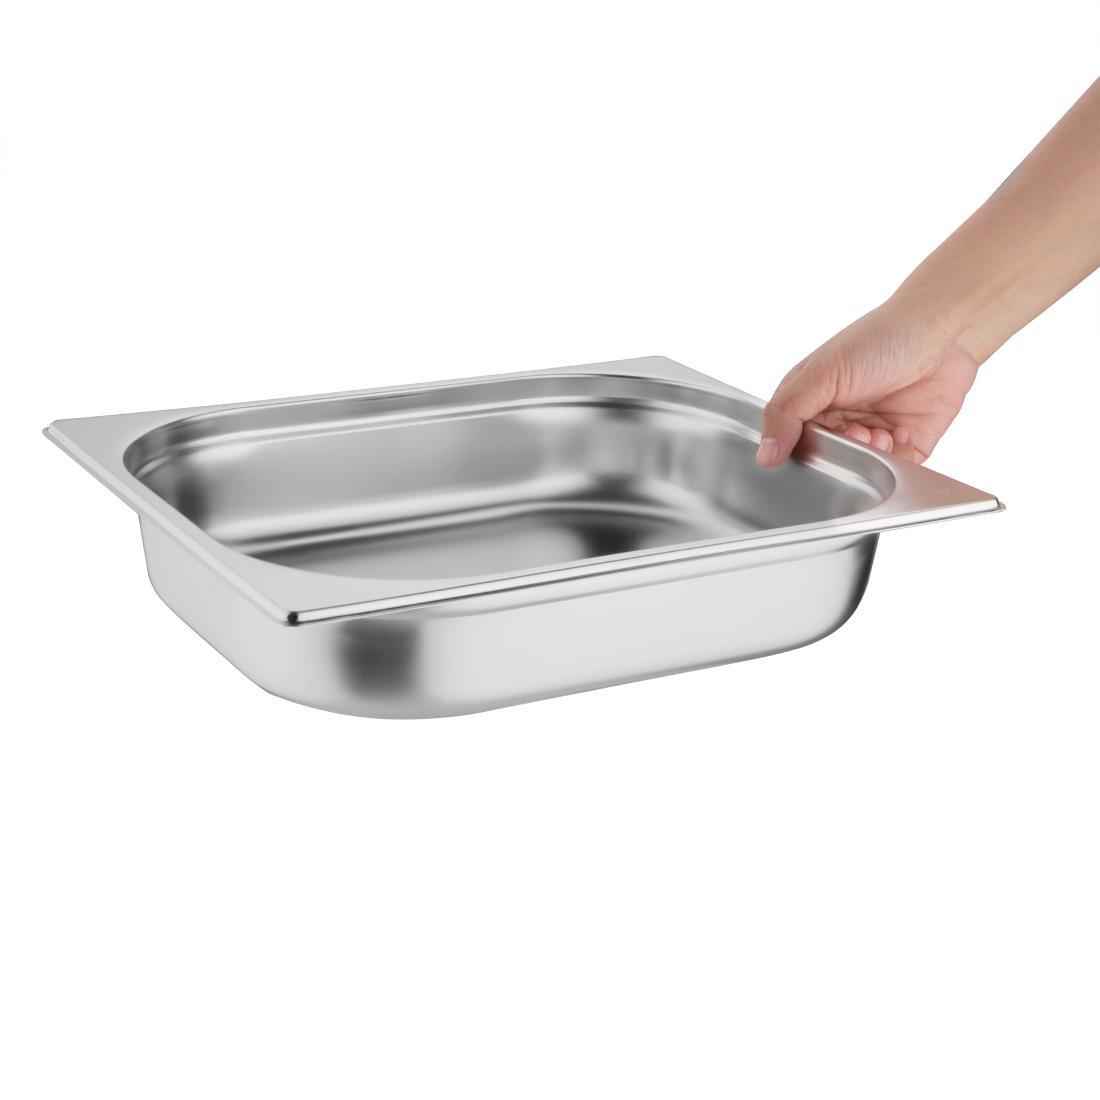 Vogue Stainless Steel 1/2 Gastronorm Pan 65mm - K927  - 5